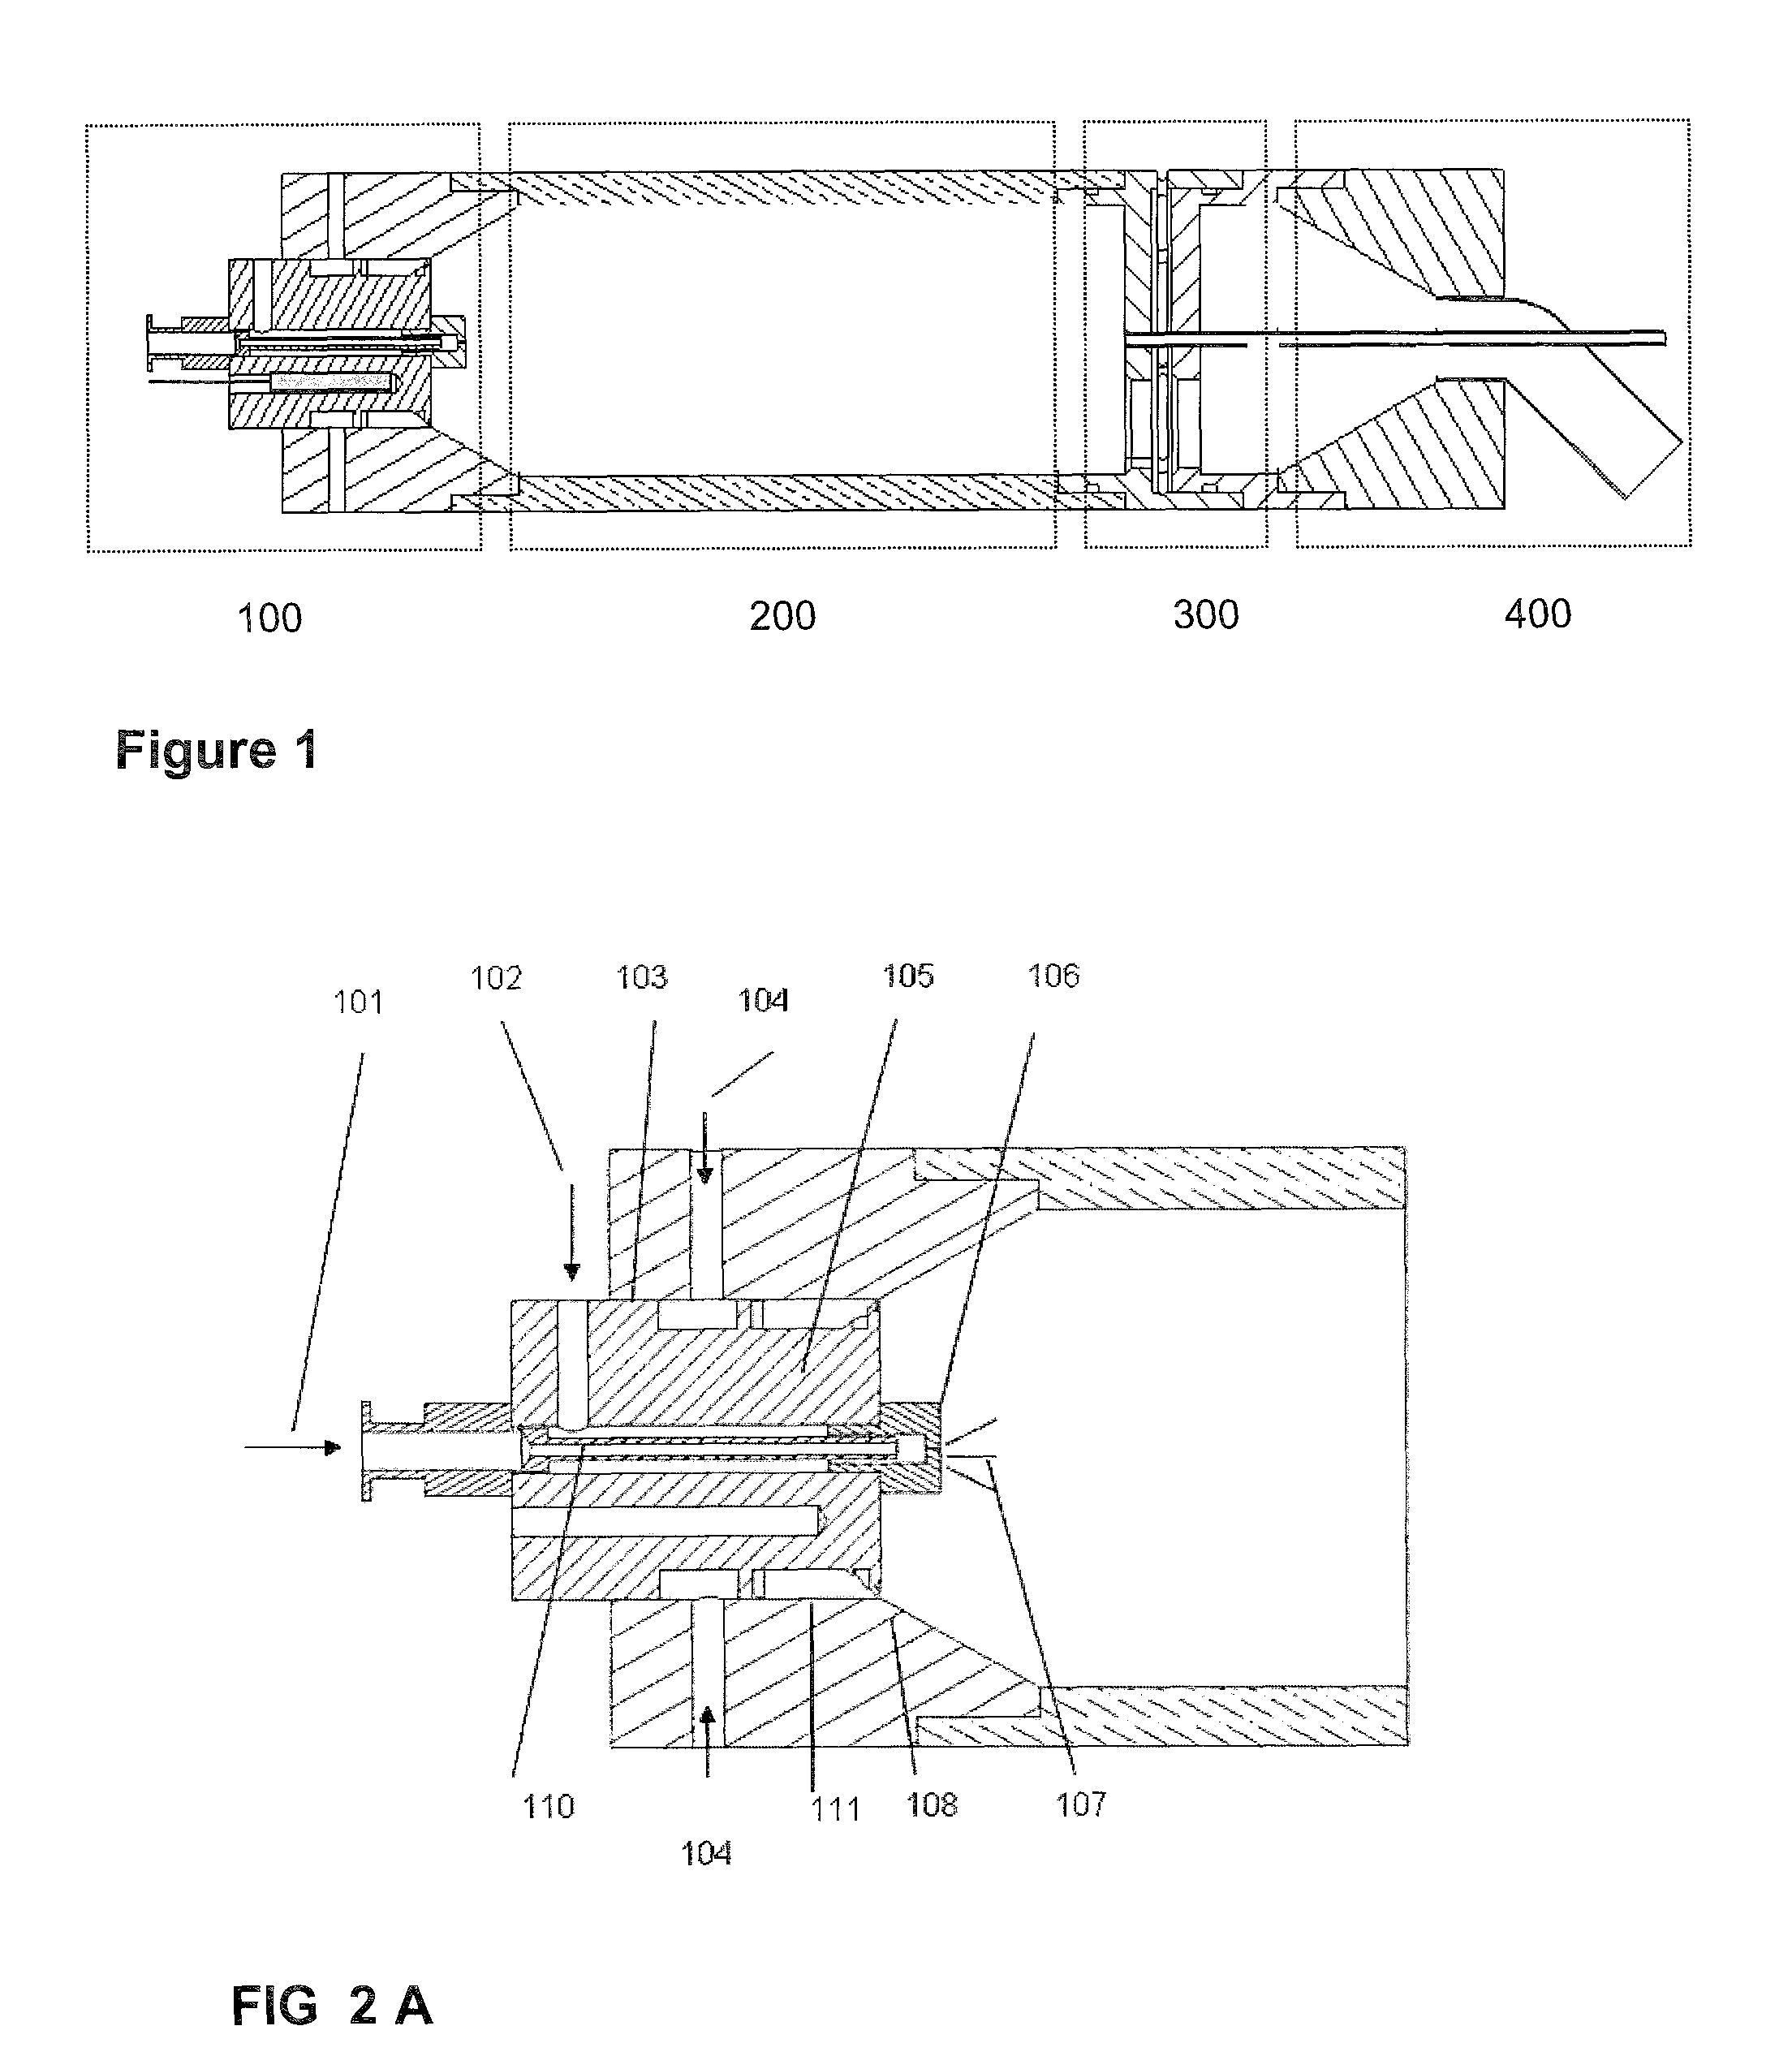 Aerosol processing and inhalation method and system for high dose rate aerosol drug delivery